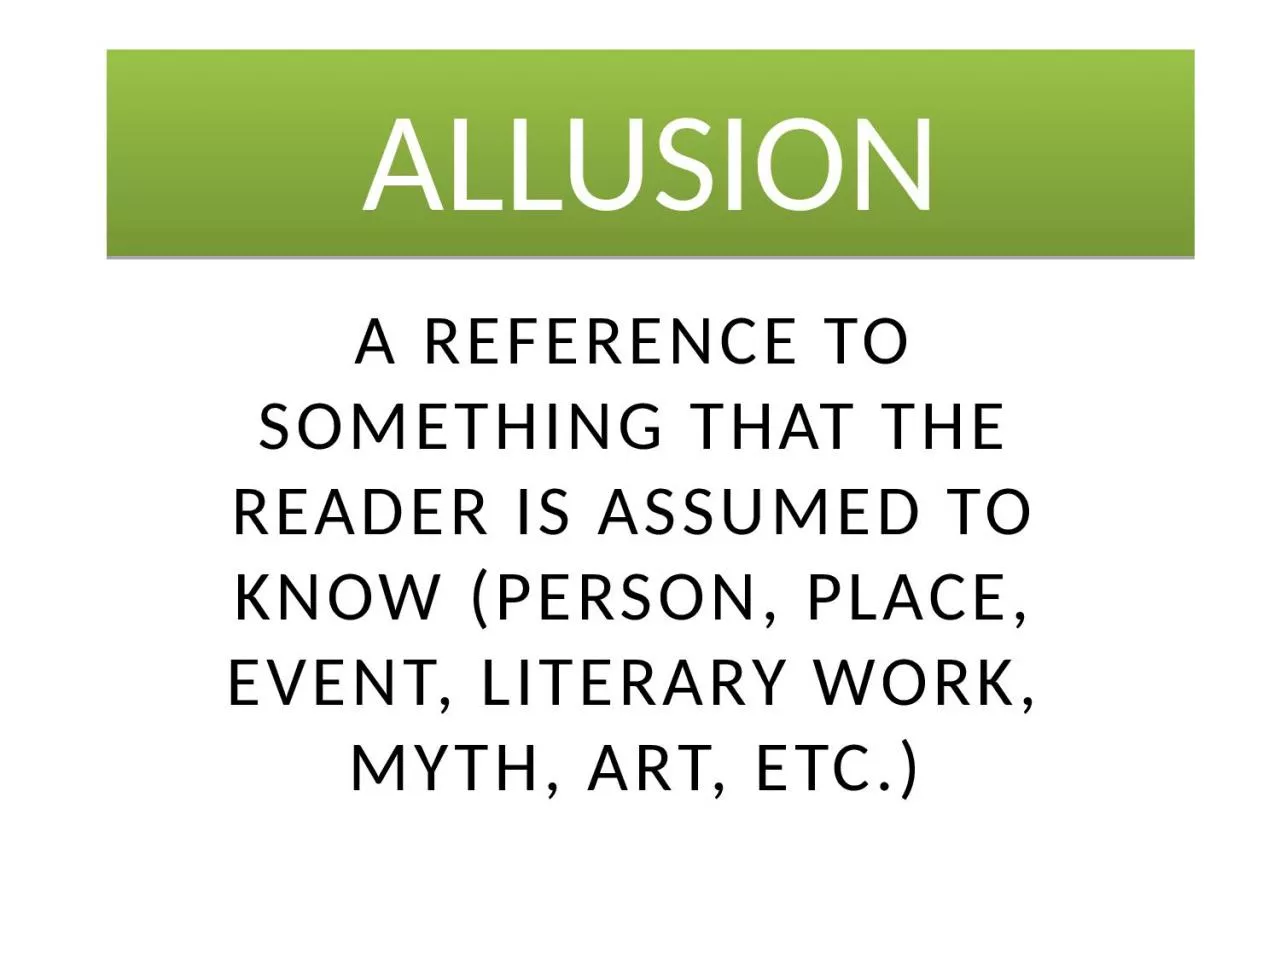 ALLUSION A reference to something that the reader is assumed to know (person, place, event,